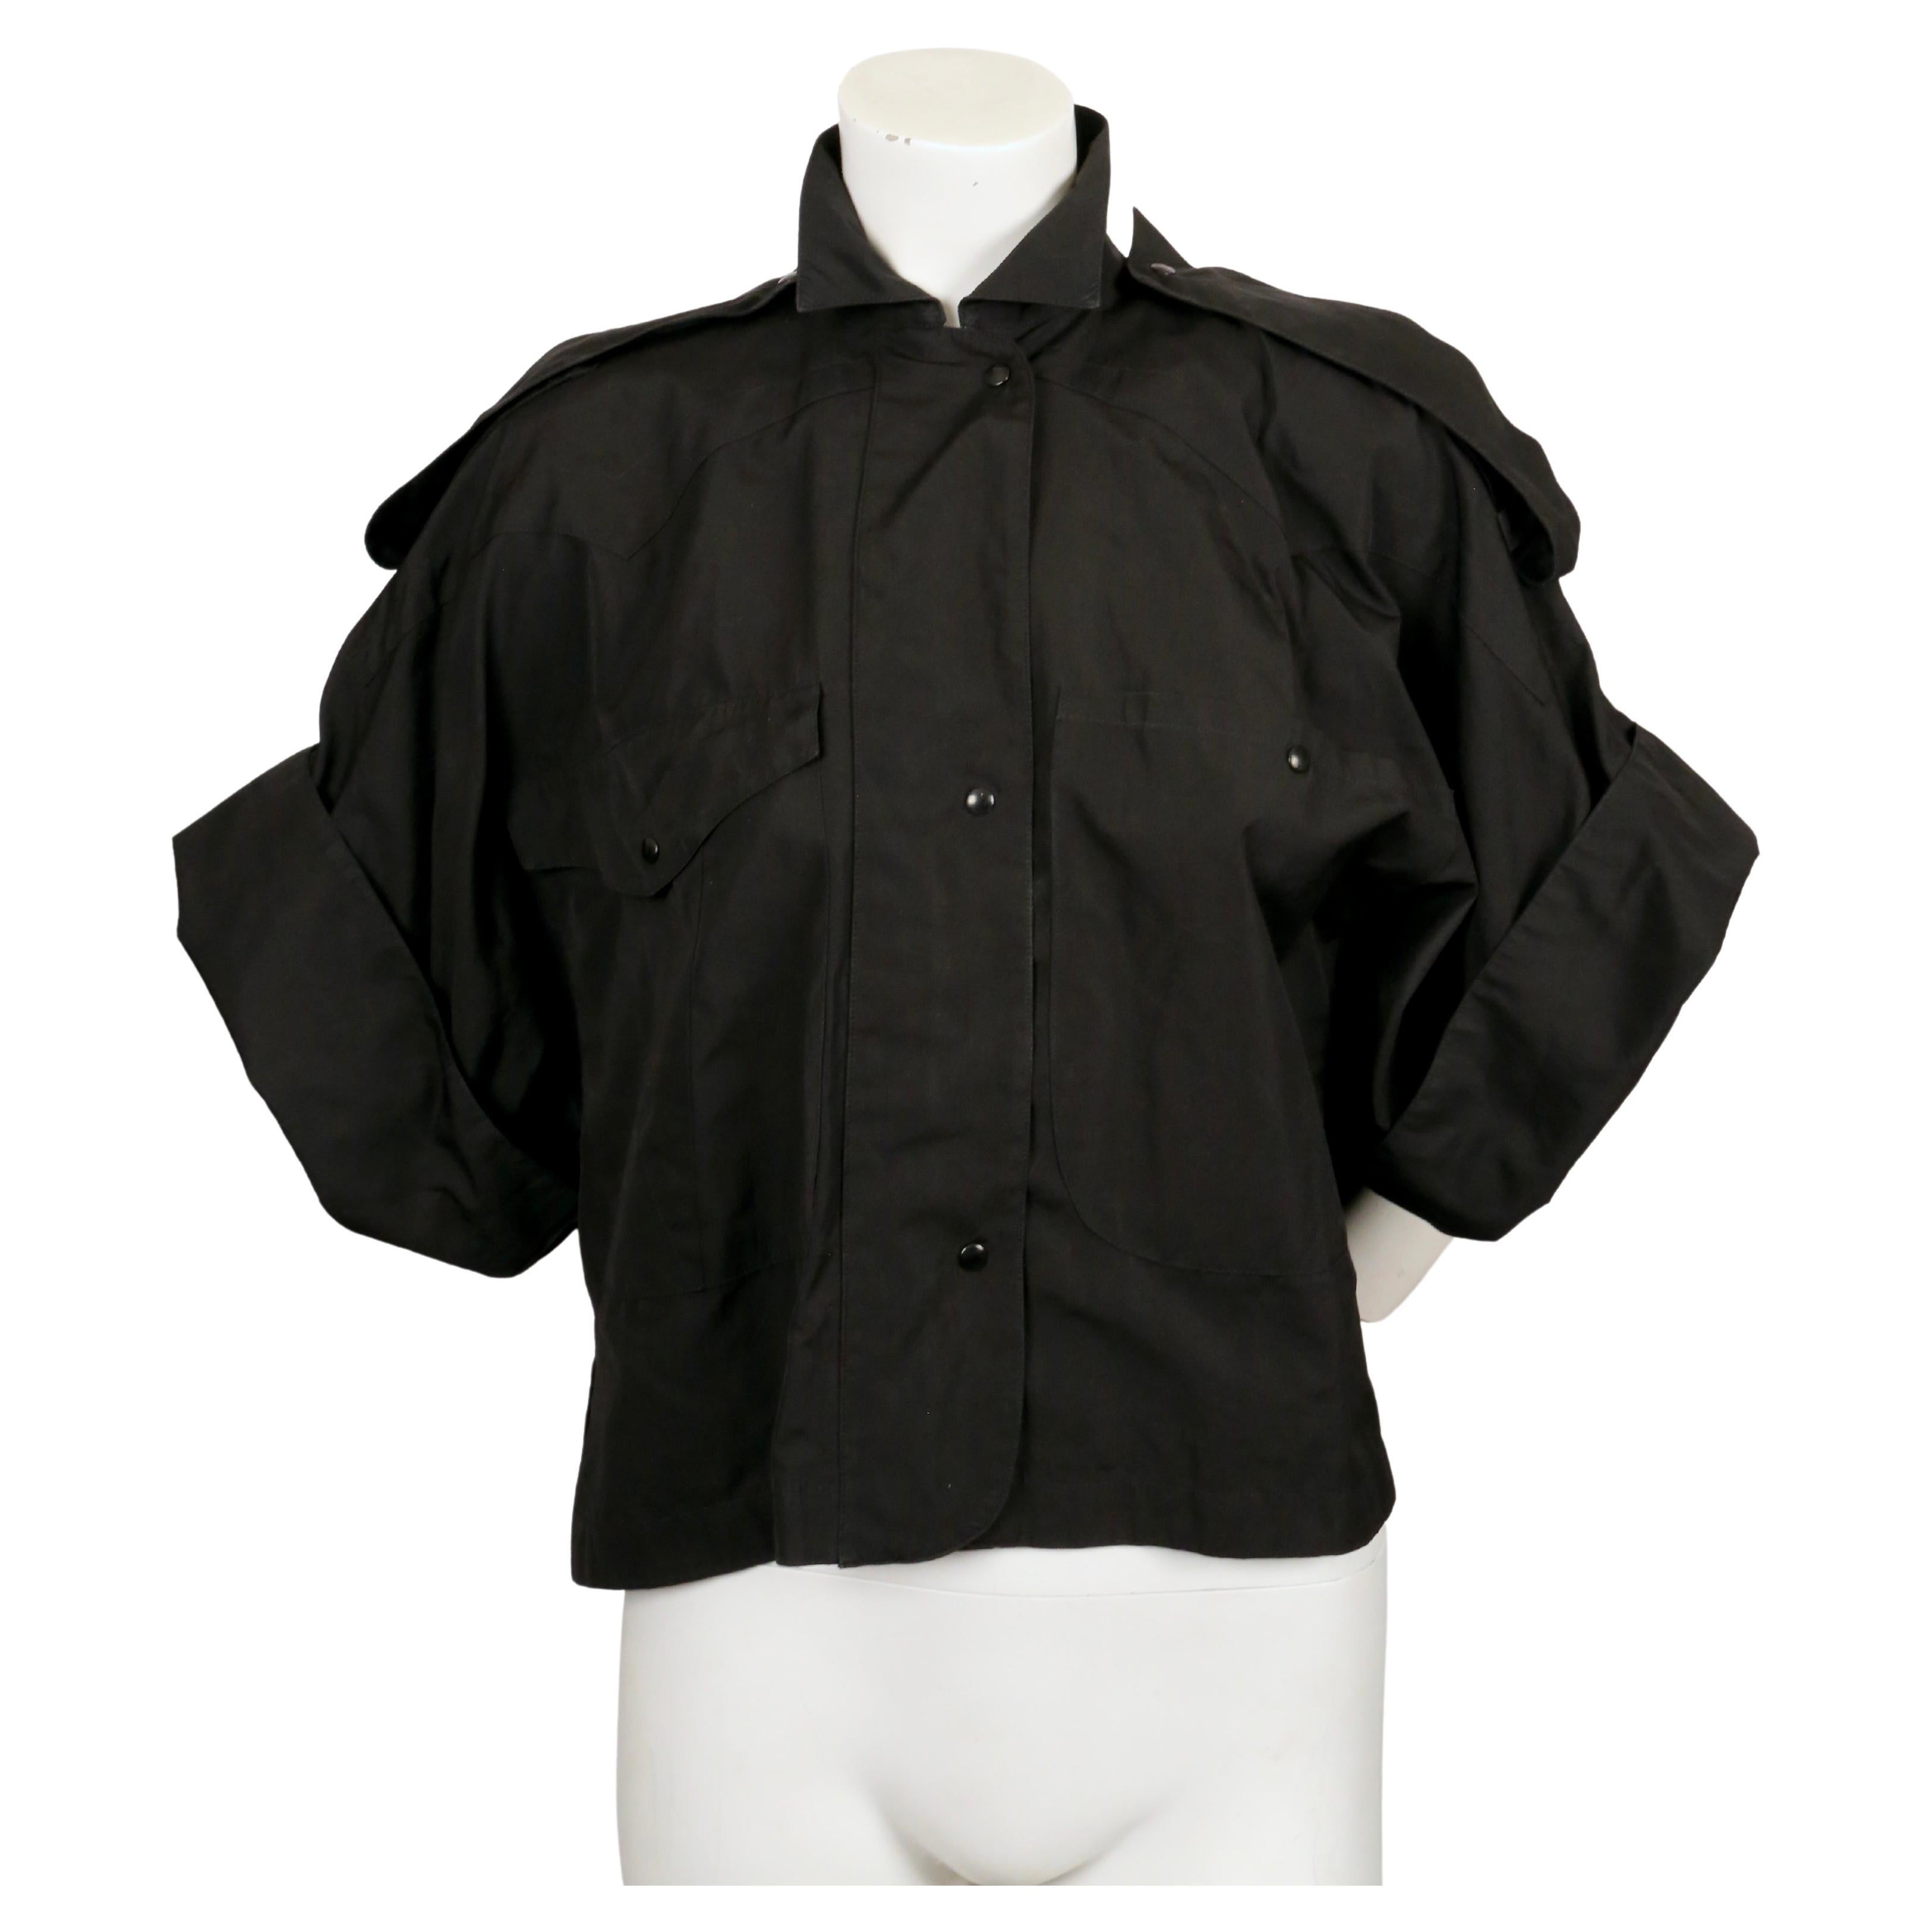 Cropped, black cotton, shirt jacket with short sleeves designed by Claude Montana dating to the late 1980's. French size 36 however this has a very oversized fit. Approximate measurements: drop shoulder 25.5